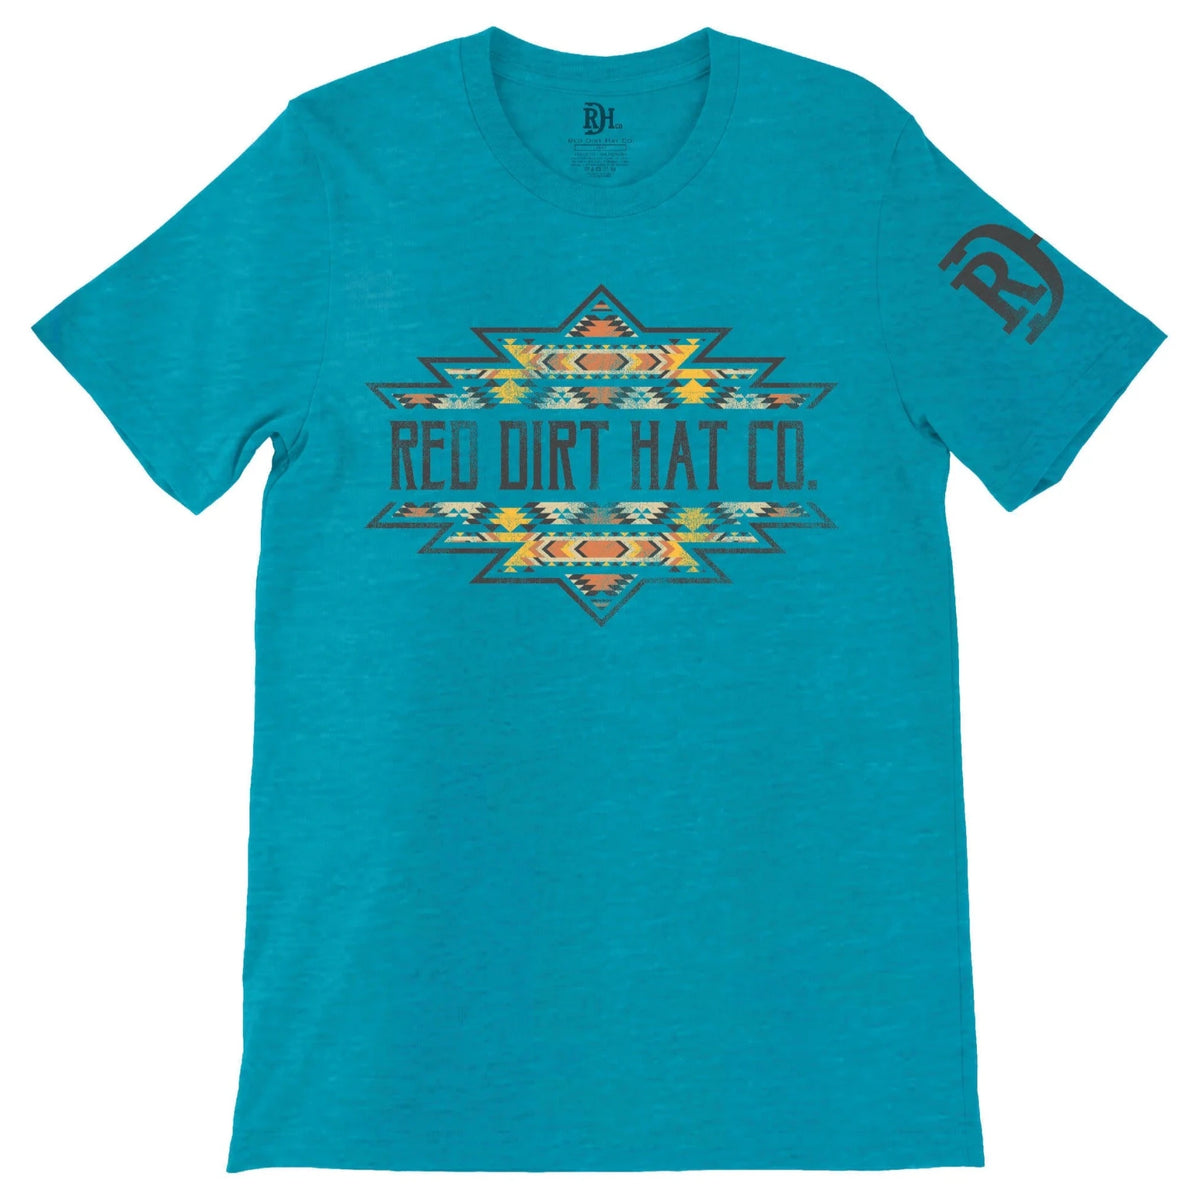 Red Dirt Hat Co. "Aztec Shape" T-Shirt in Turquoise